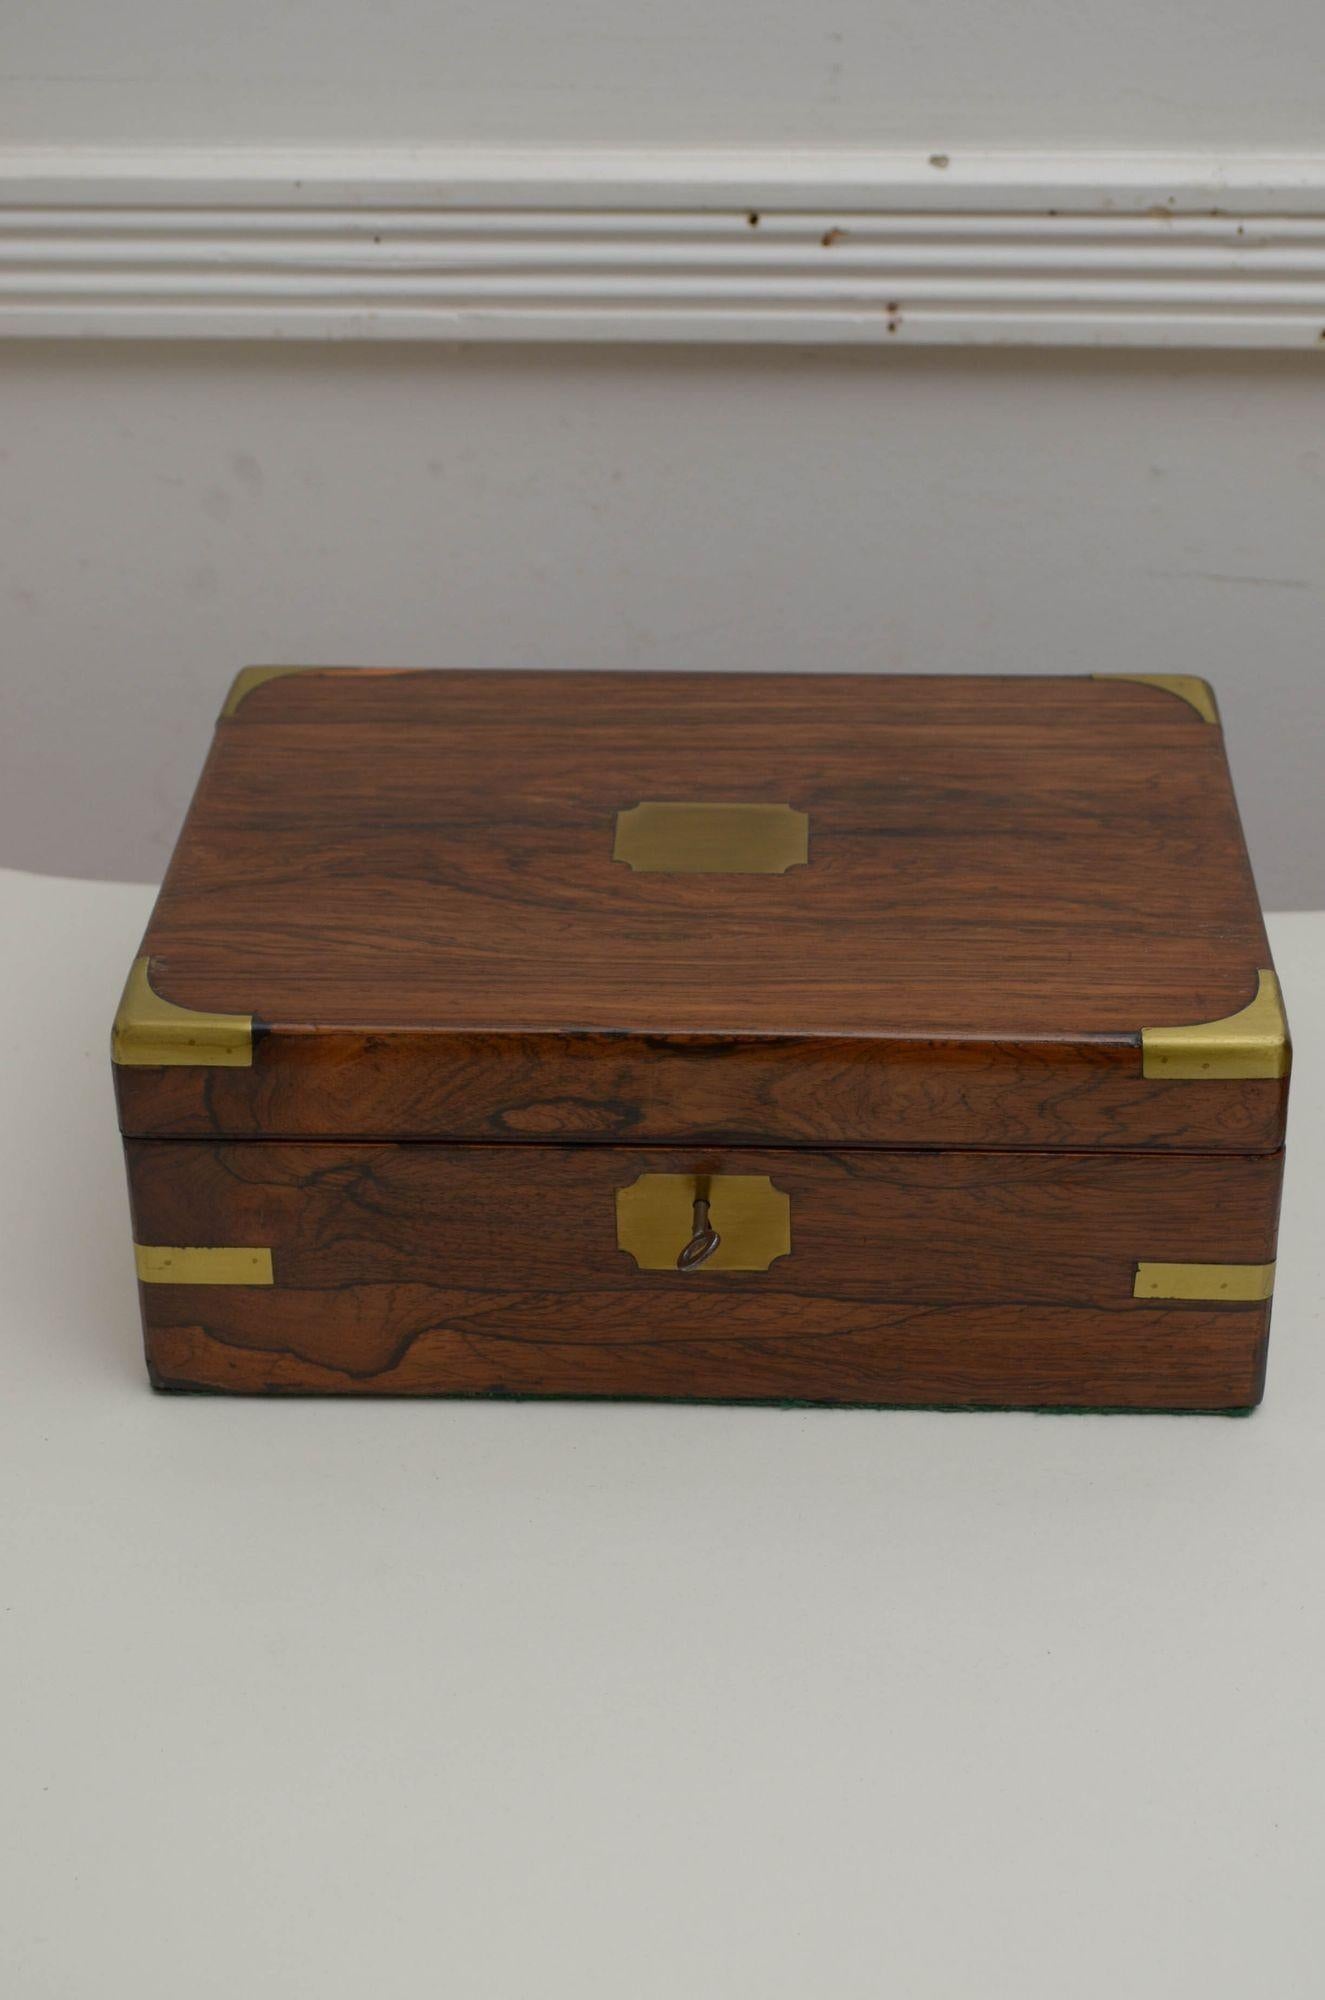 J033 Attractive Victorian rosewood writing box, having brass bounds to each corner and a lift up lid with original working lock and a key which open to reveal pen try, ink well and maroon leather writing surface. All in home ready condition. 1870
H4